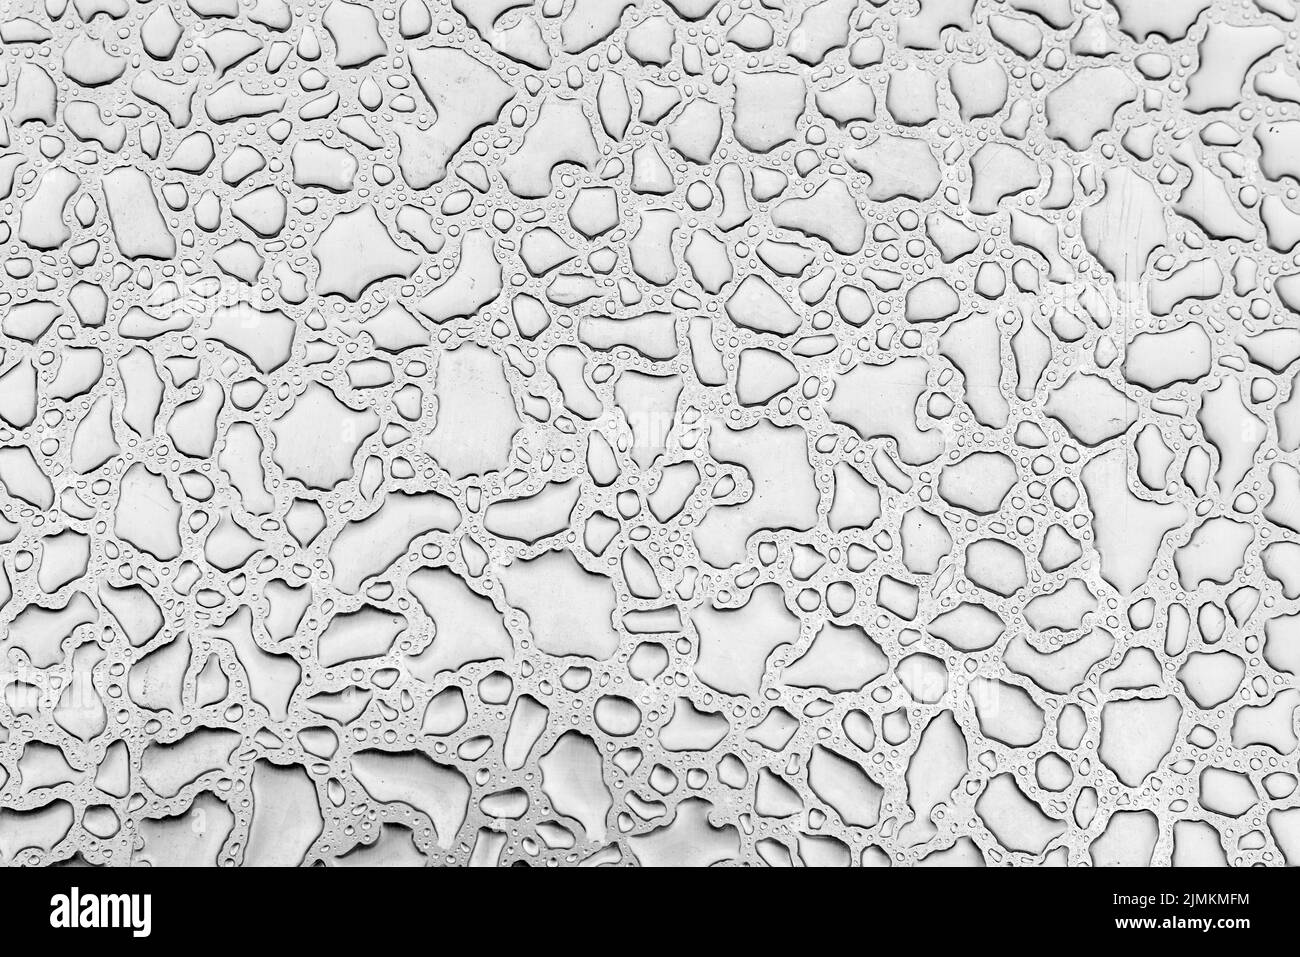 Water drops on stainless steel metal plate after rain Stock Photo